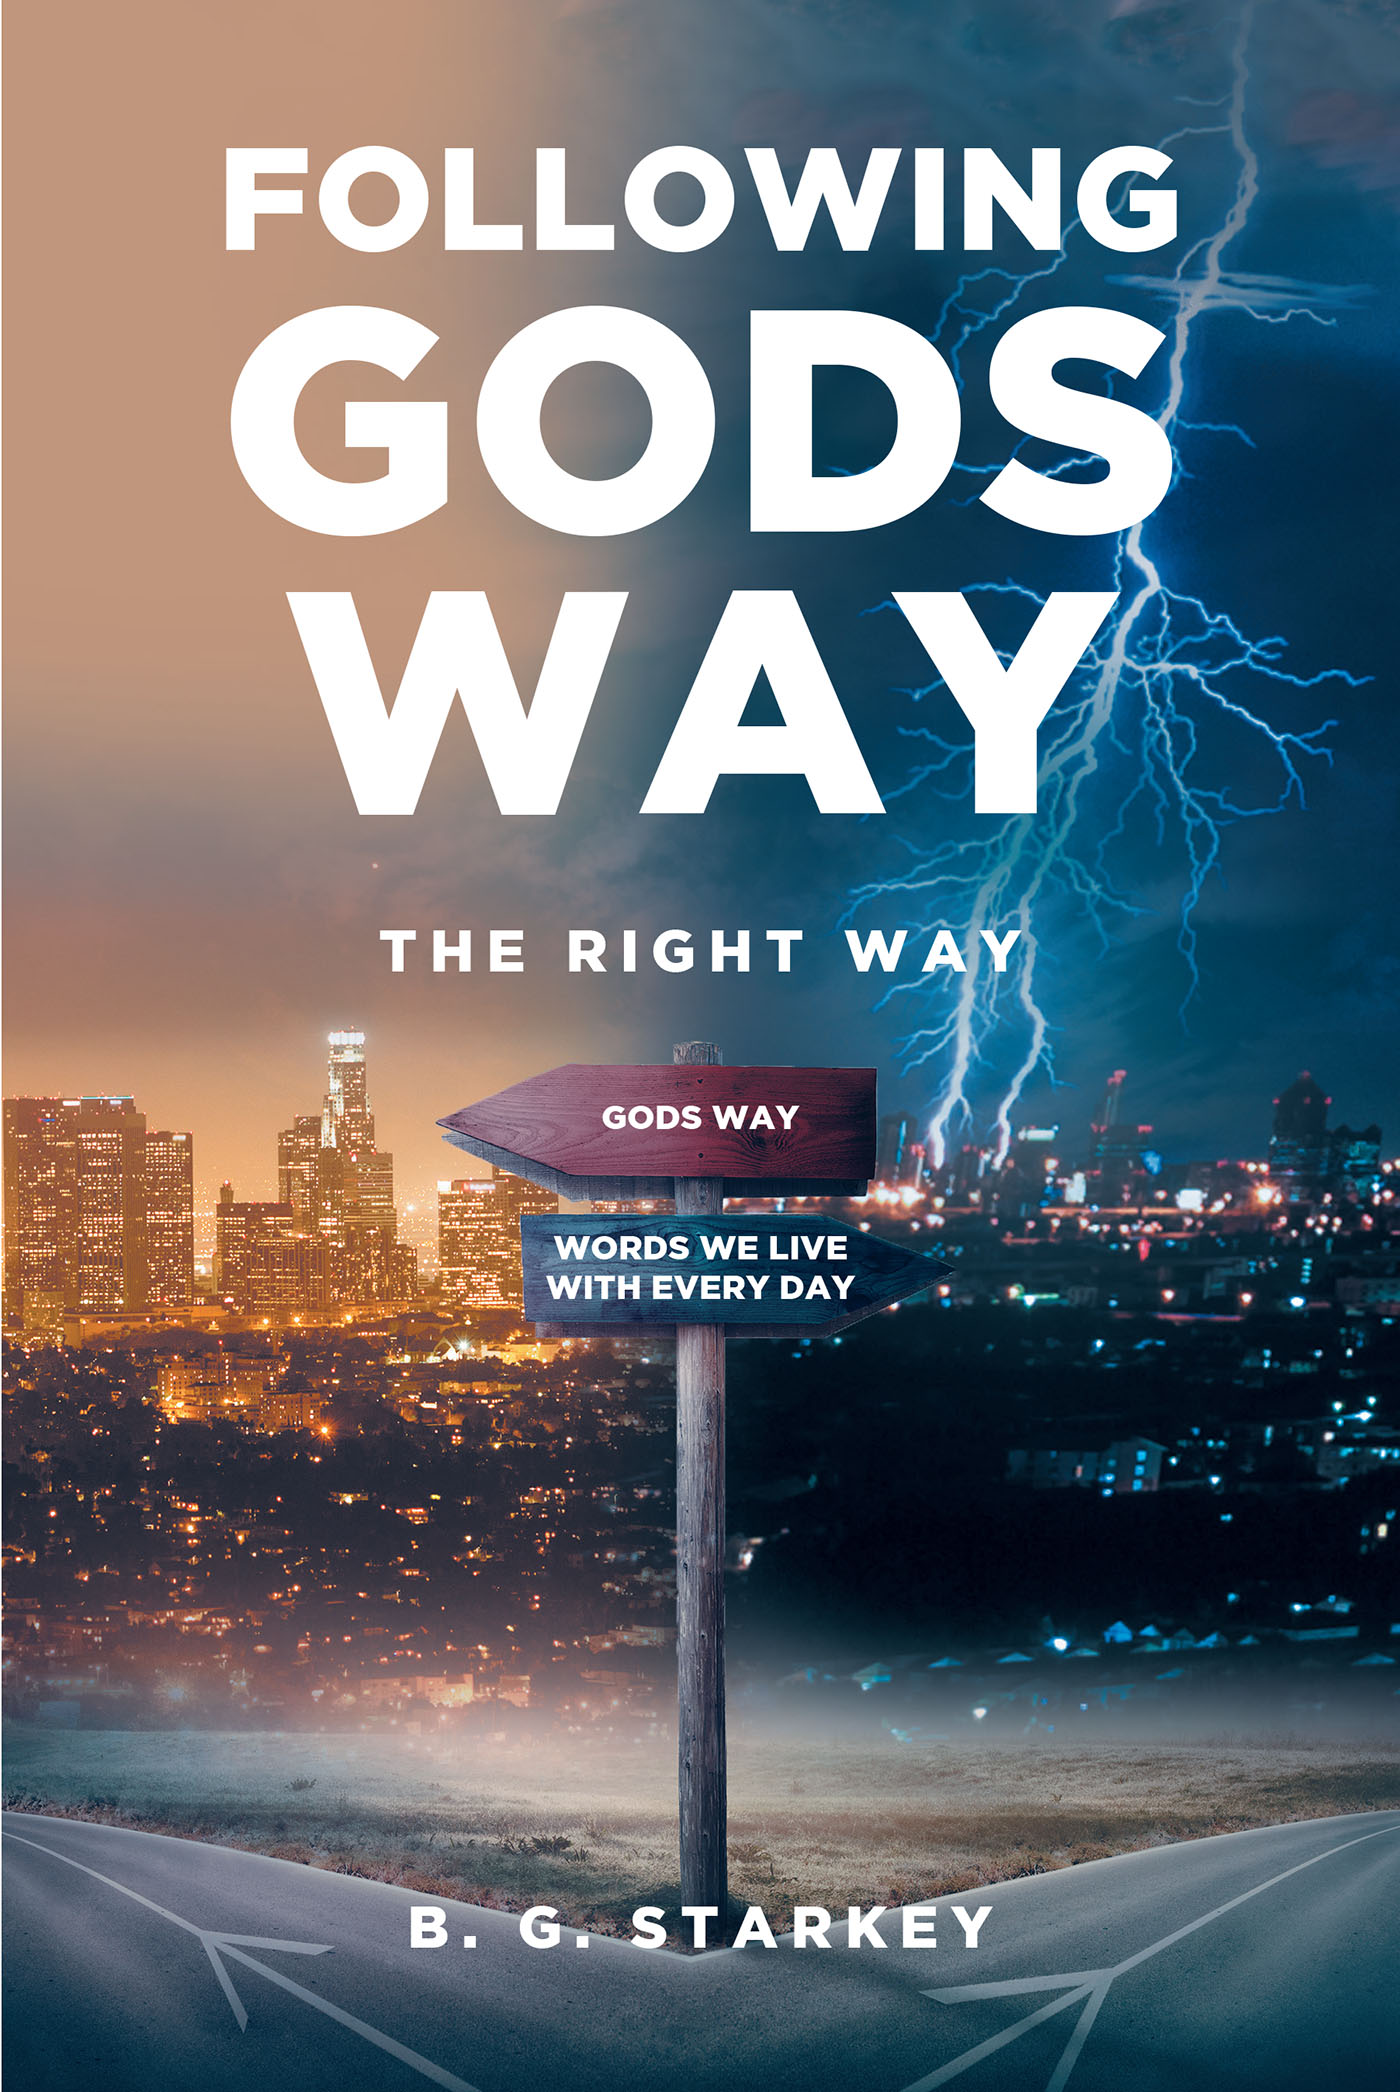 B. G. Starkey’s Newly Released “Following Gods Way: The Right Way” is an Inspirational Guide to Ethical Living Rooted in Faith